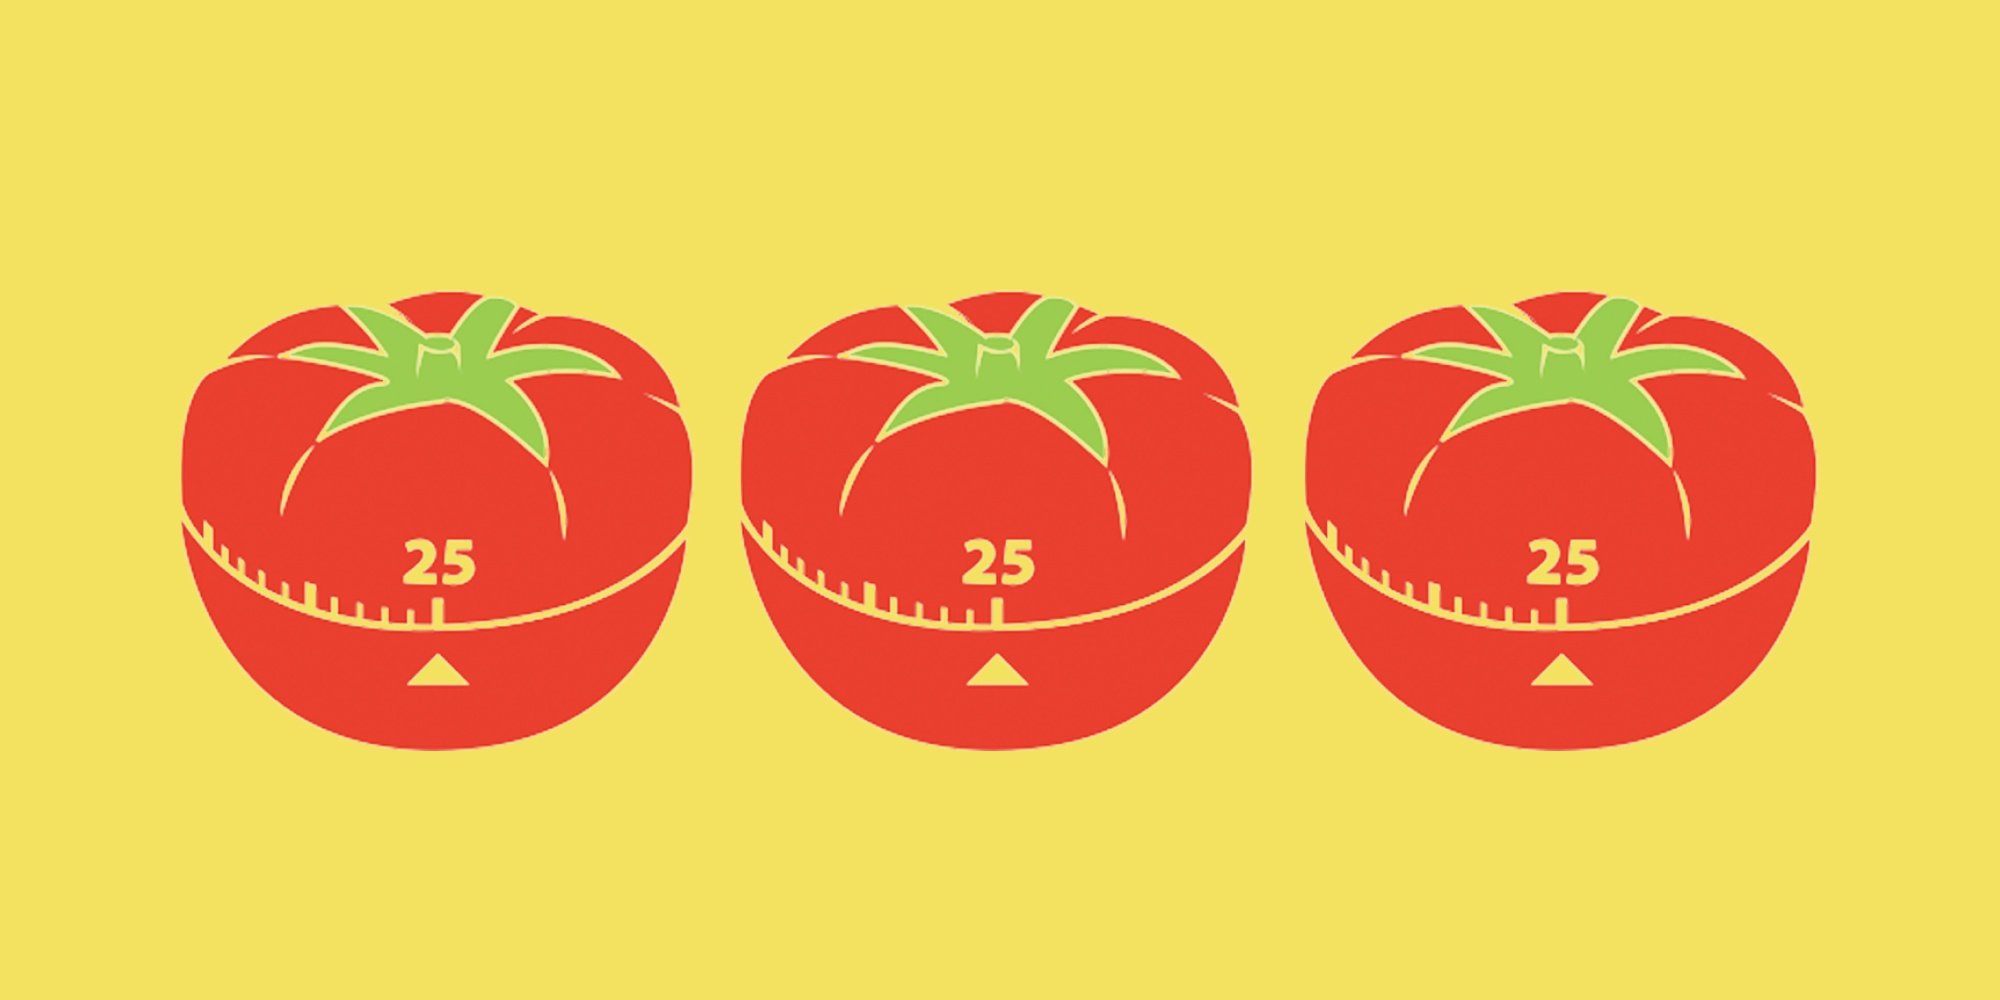 The pomodoro technique for better productivity - Work Life by Atlassian